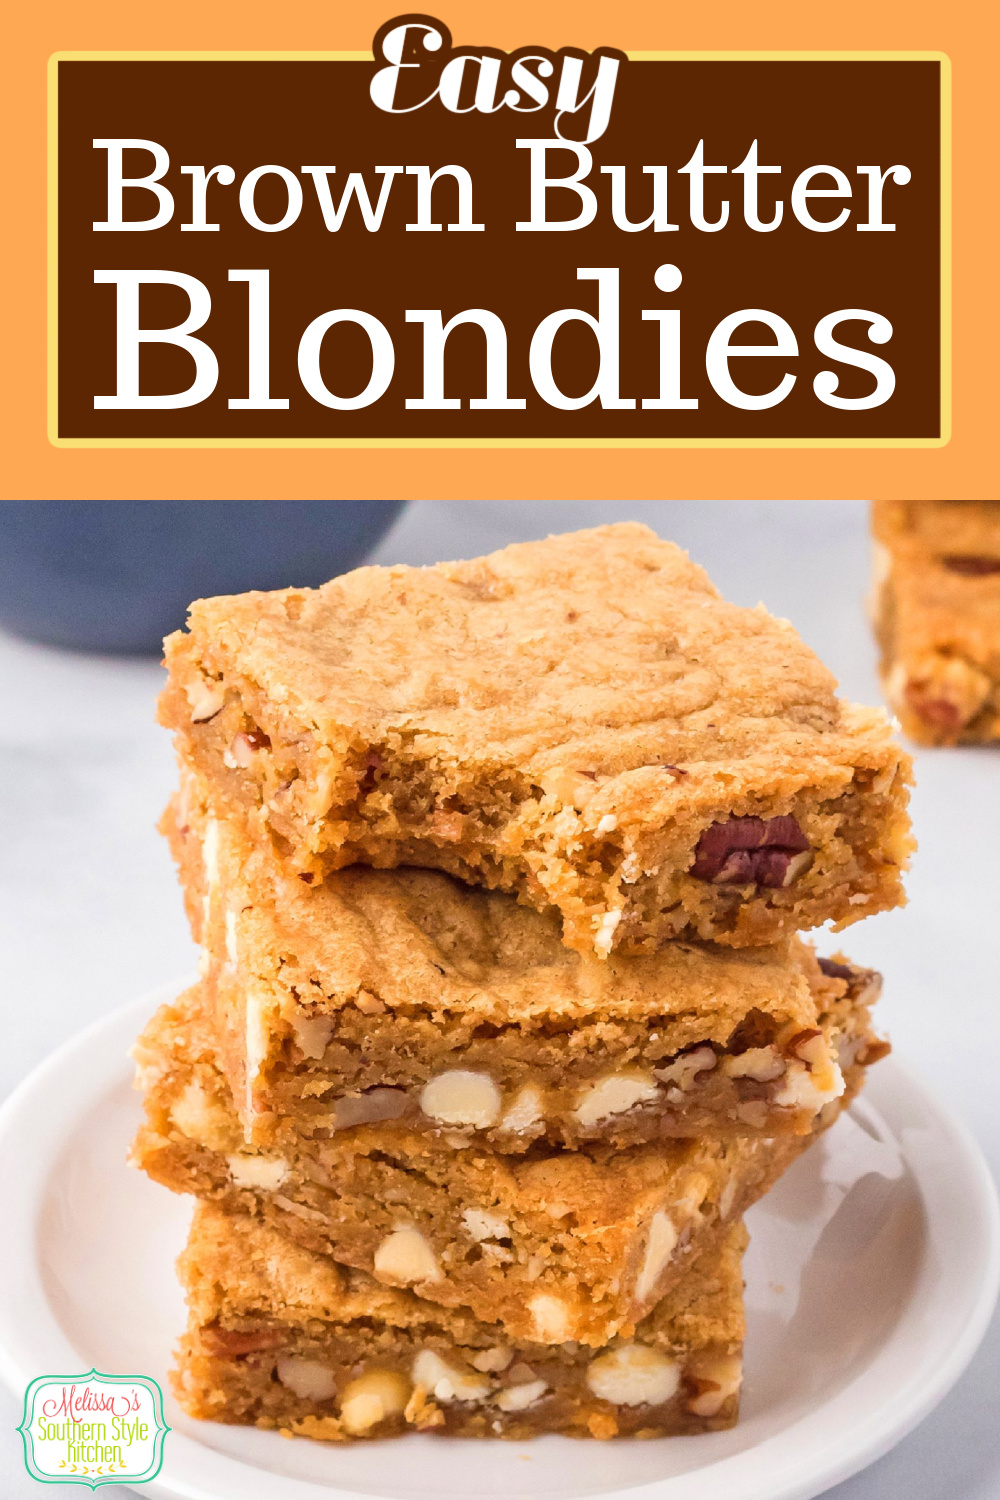 This Brown Butter Blondies recipe features a rich depth of flavor with white chocolate chips and toasted pecans for added texture. #brownbutter #brownies #blondies #blondiesrecipe #brownbutterblondies #easyblondierecipes #cookiebars via @melissasssk